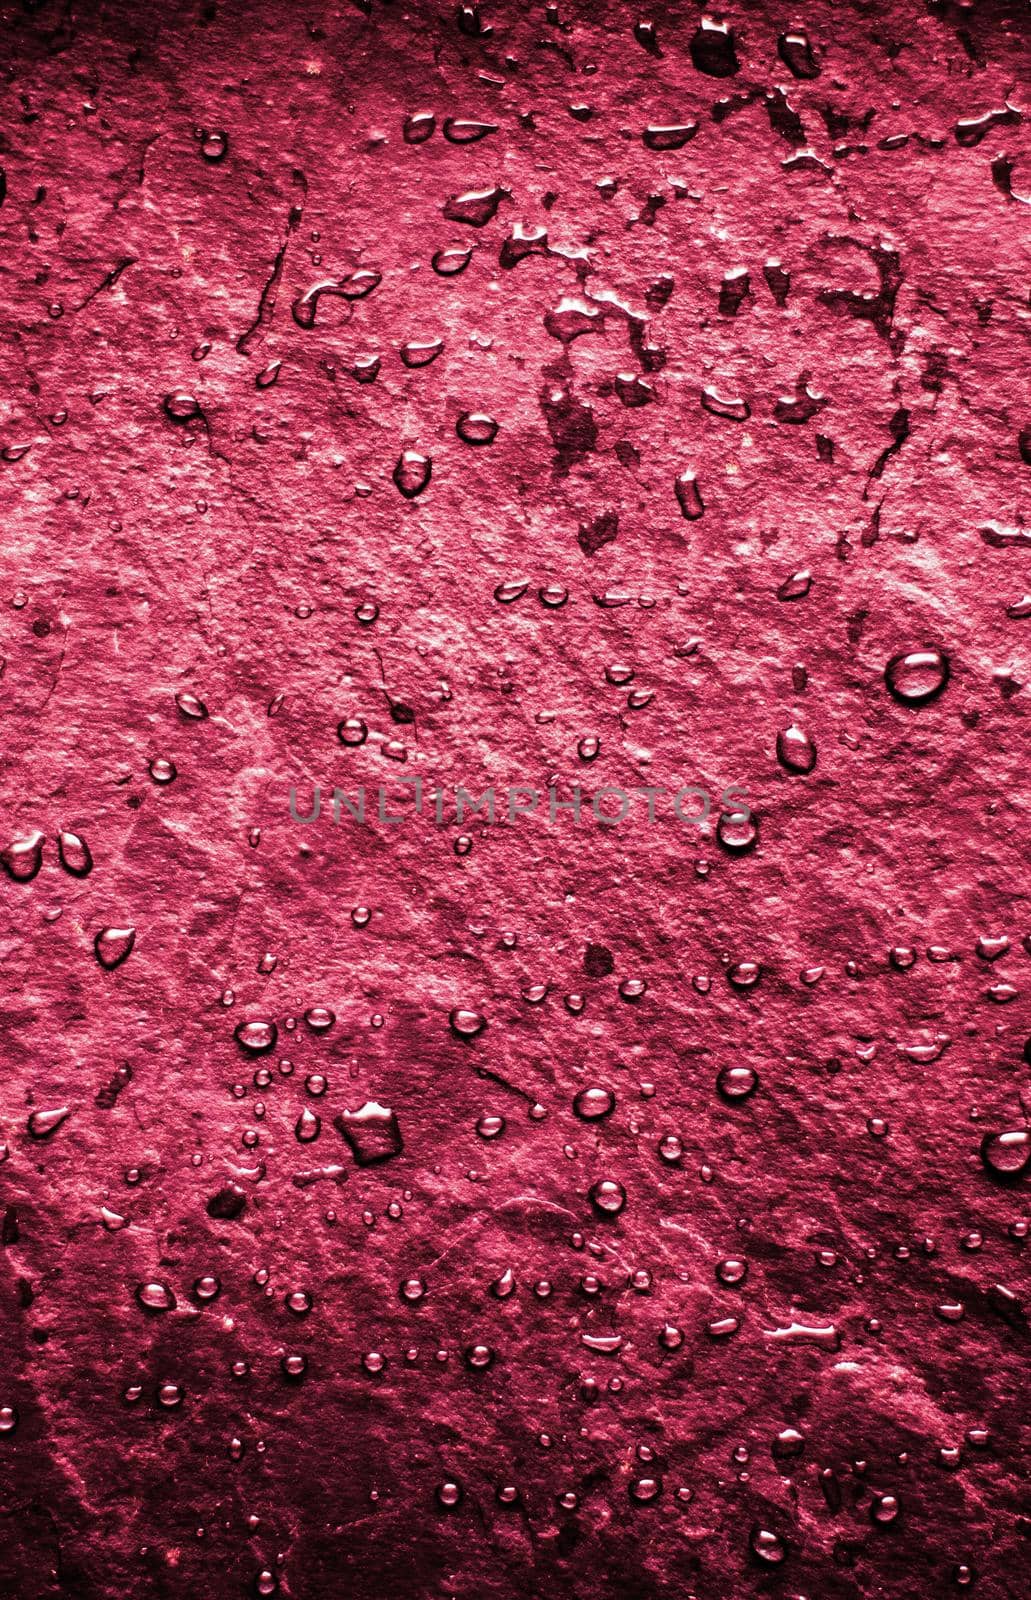 Liquid drops on old stone wall as an abstract background - environmental and vintage concept. Water is the source of life